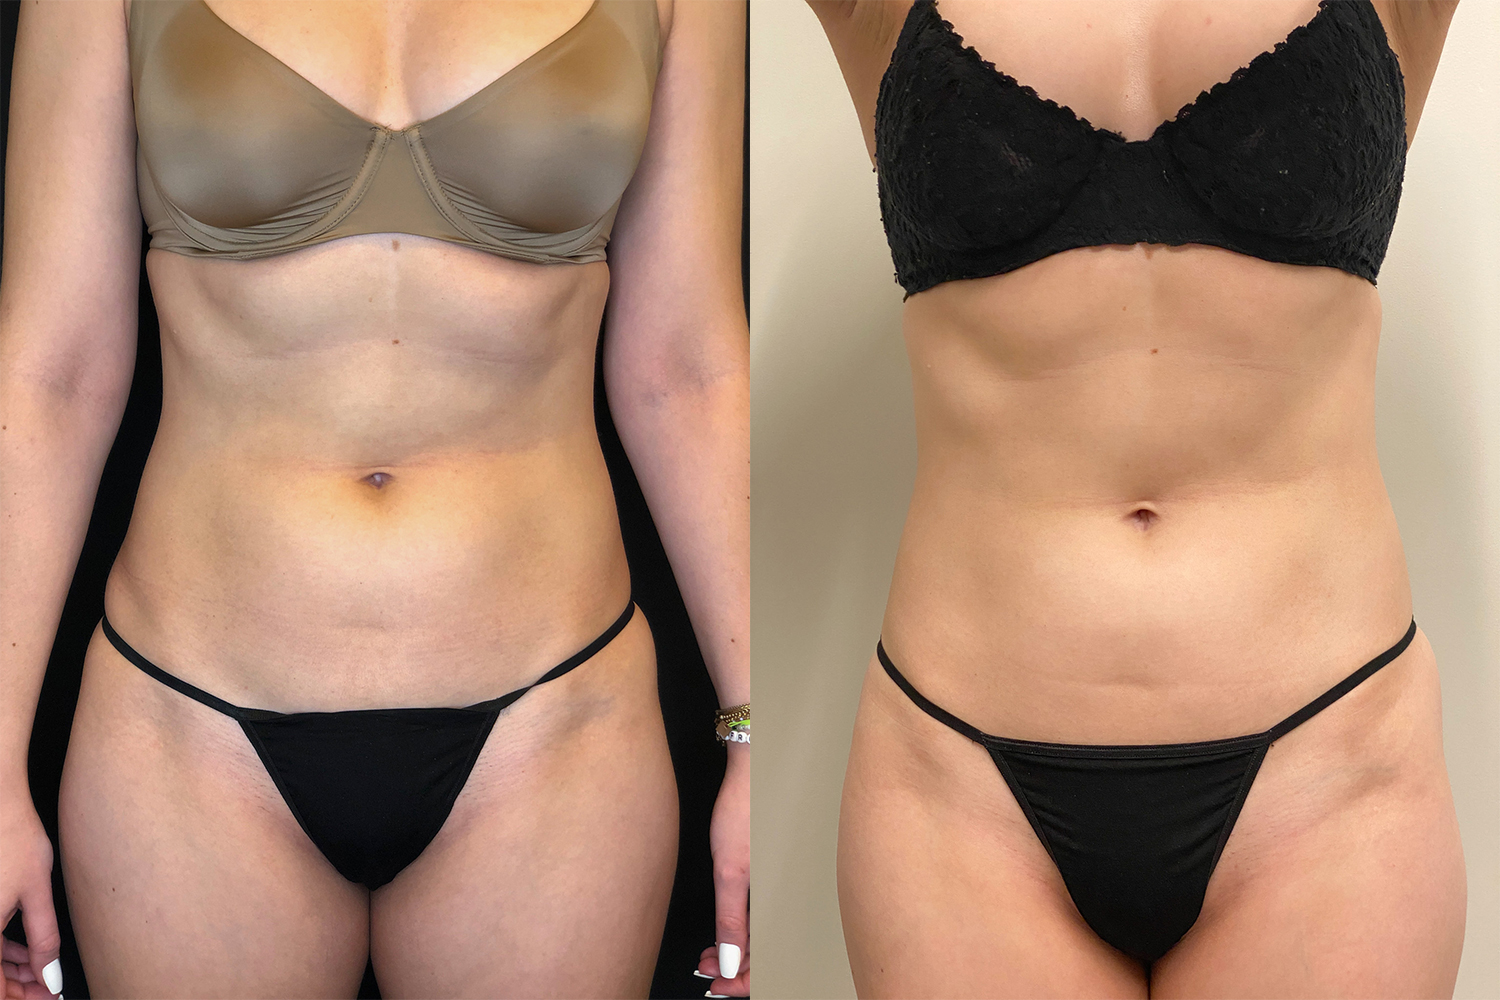 Emsculpt Before and After: An Effective Body Contouring Treatment